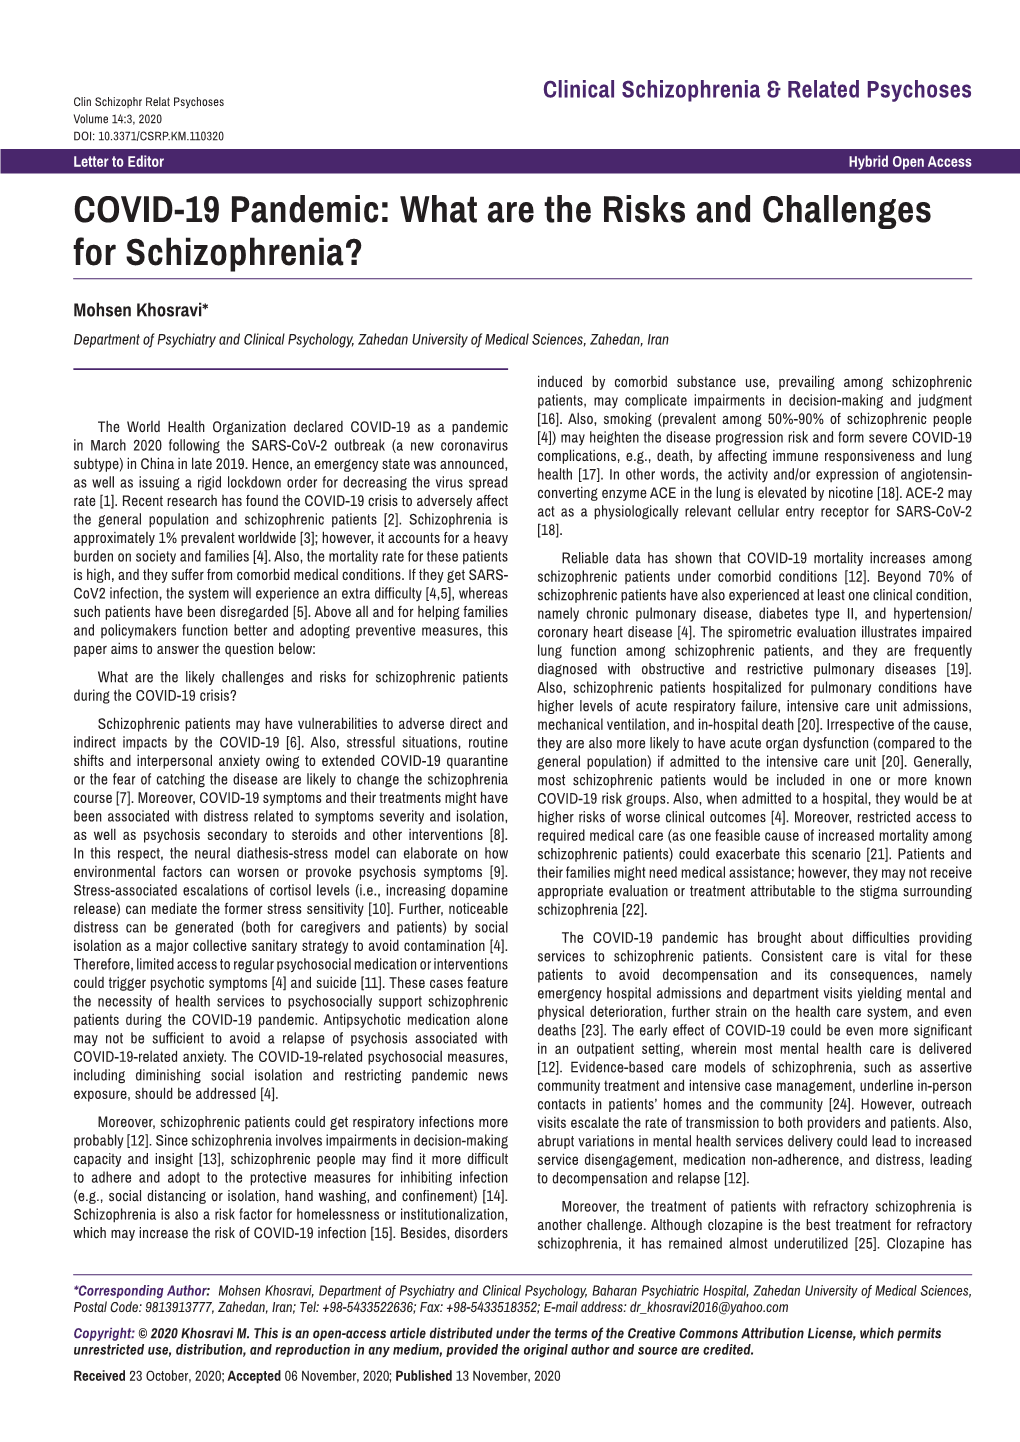 COVID-19 Pandemic: What Are the Risks and Challenges for Schizophrenia?